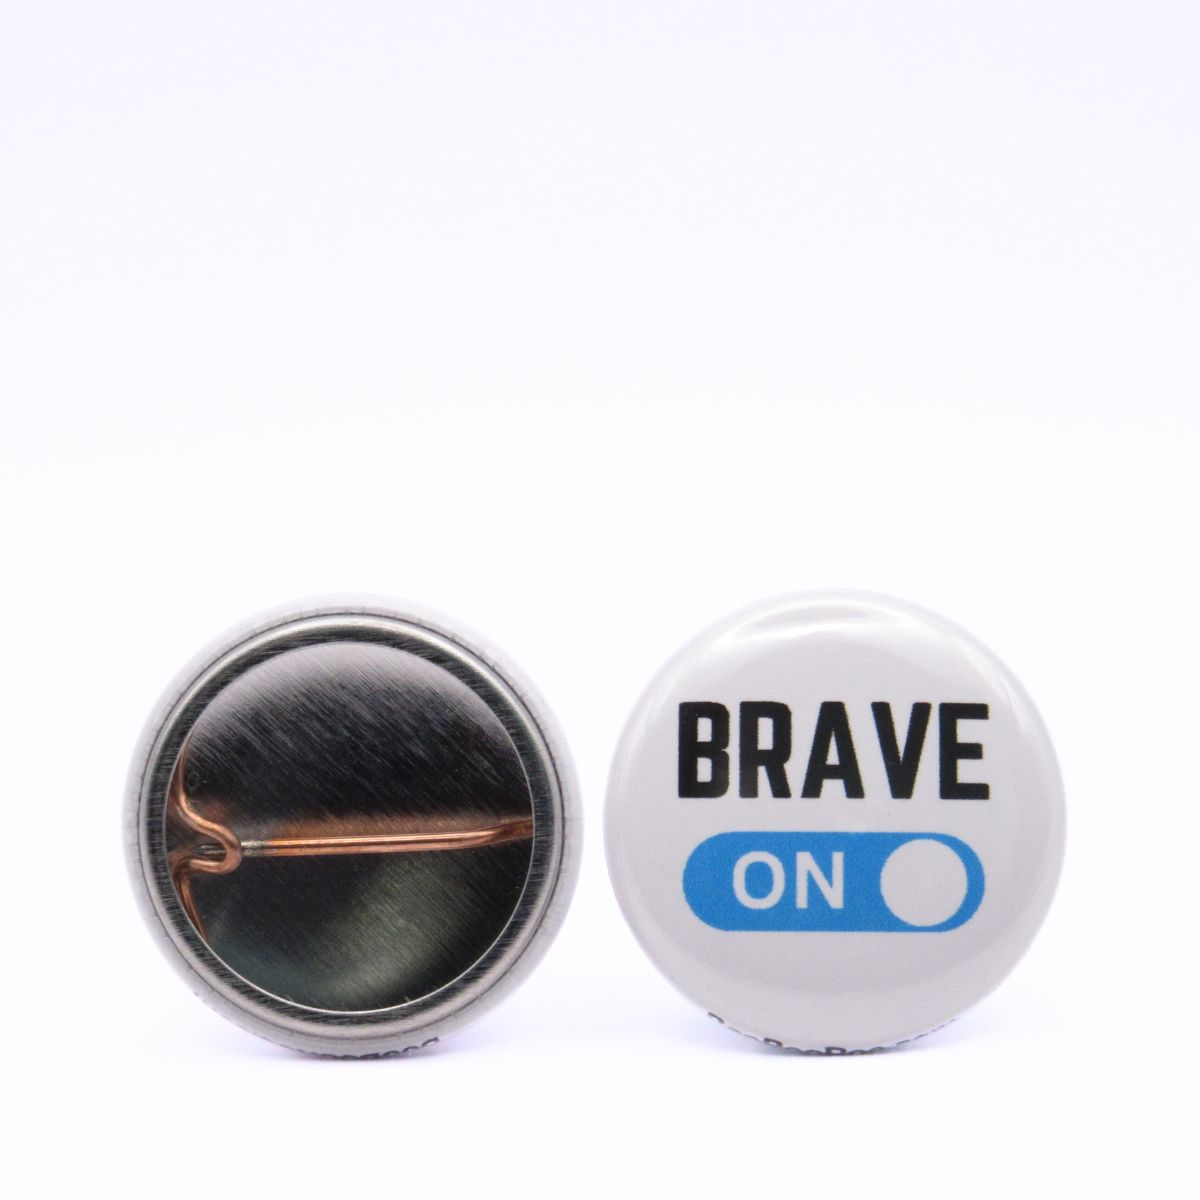 BooBooRoo Pinback Button (i.e. button, badge, pin) 3-pack displaying soccer love, fierce mode on, and strong mode on.  Image showing front and back of high-quality metal button.